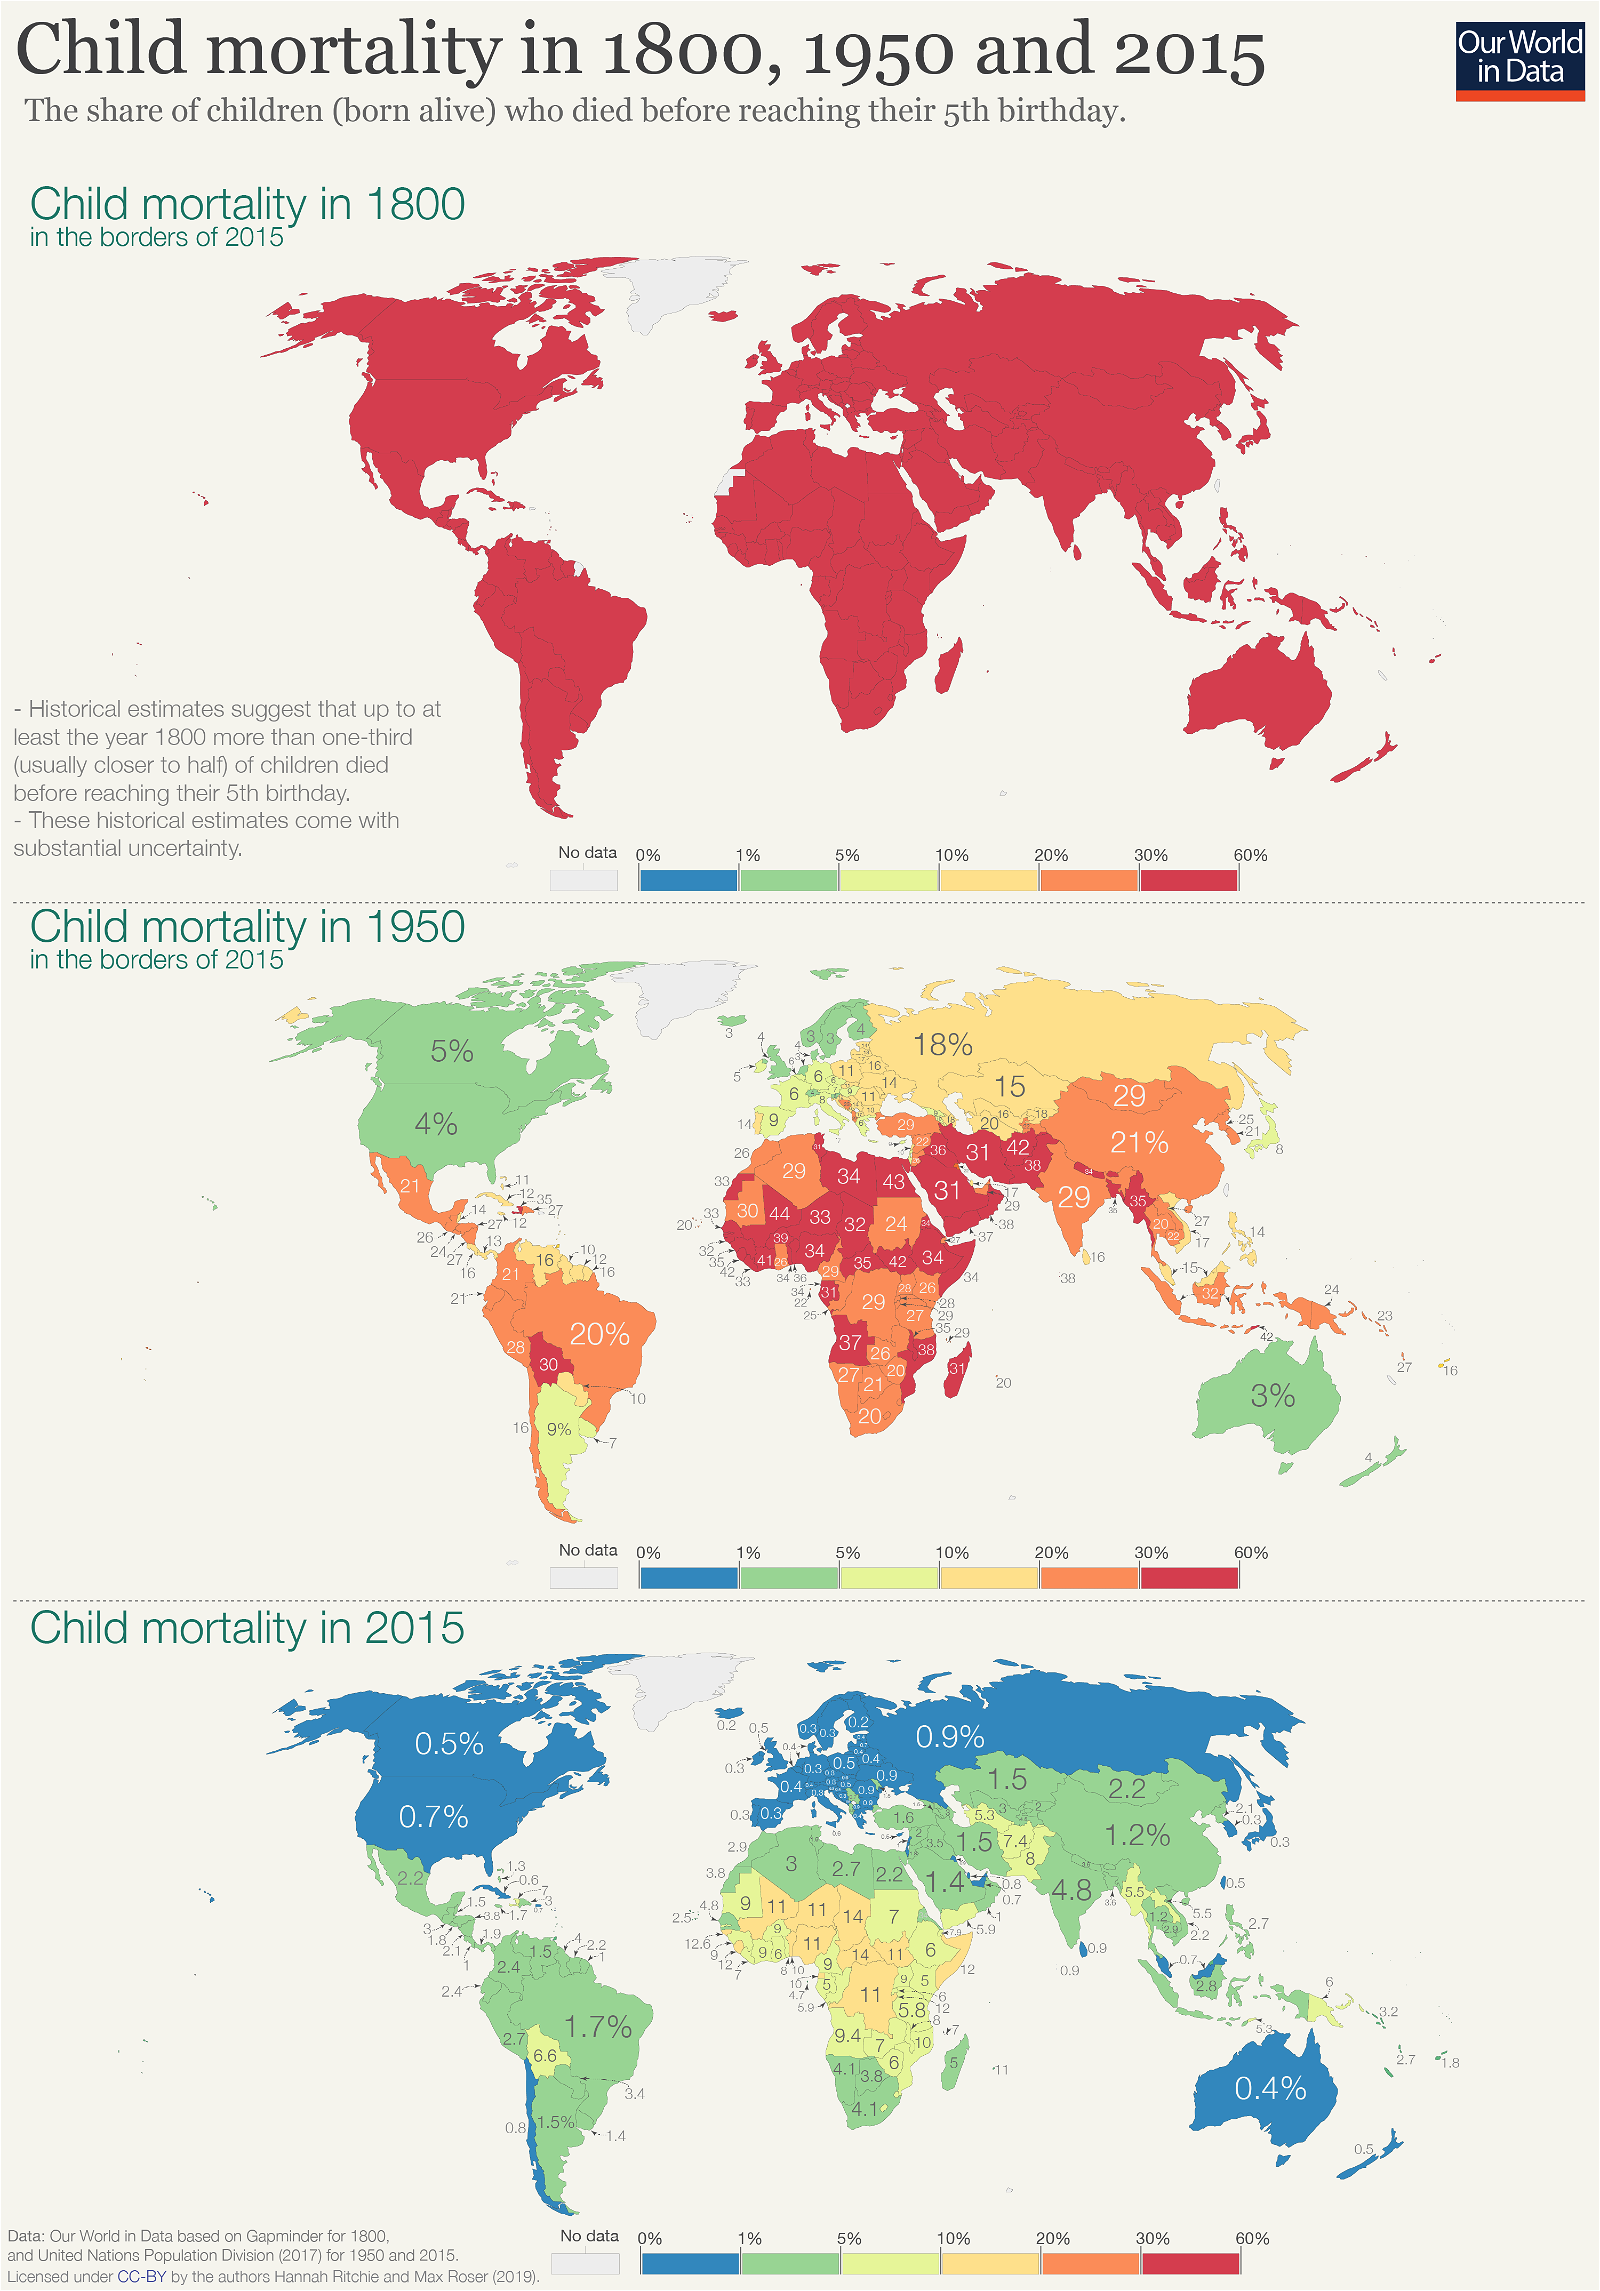 Child mortality in 1800, 1950 and 2015